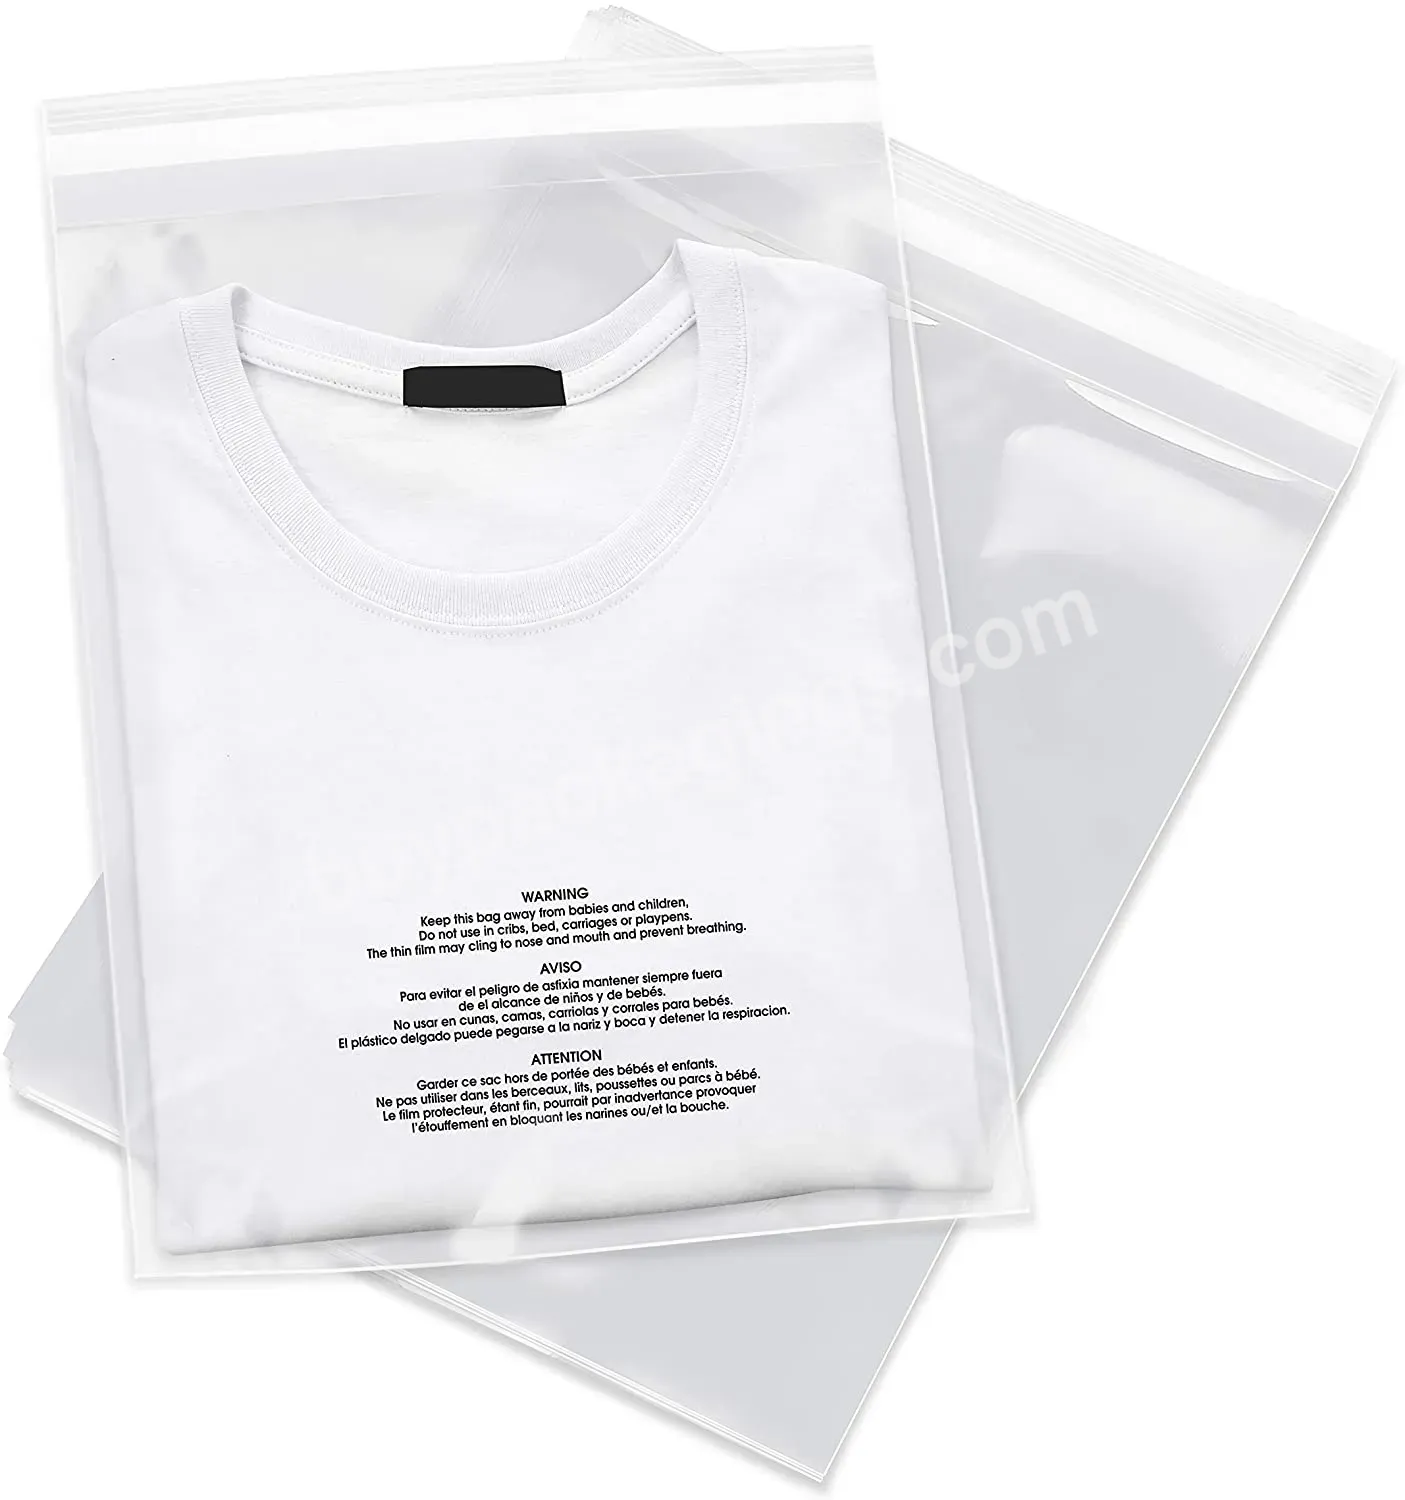 Lwb2331 Suffocate Warning Packaging Bag Clothes Poly Bag High Quality Cellophane Packaging Bag - Buy Cellophane Bags,Warning Bag,Clothes Packaging Bag.